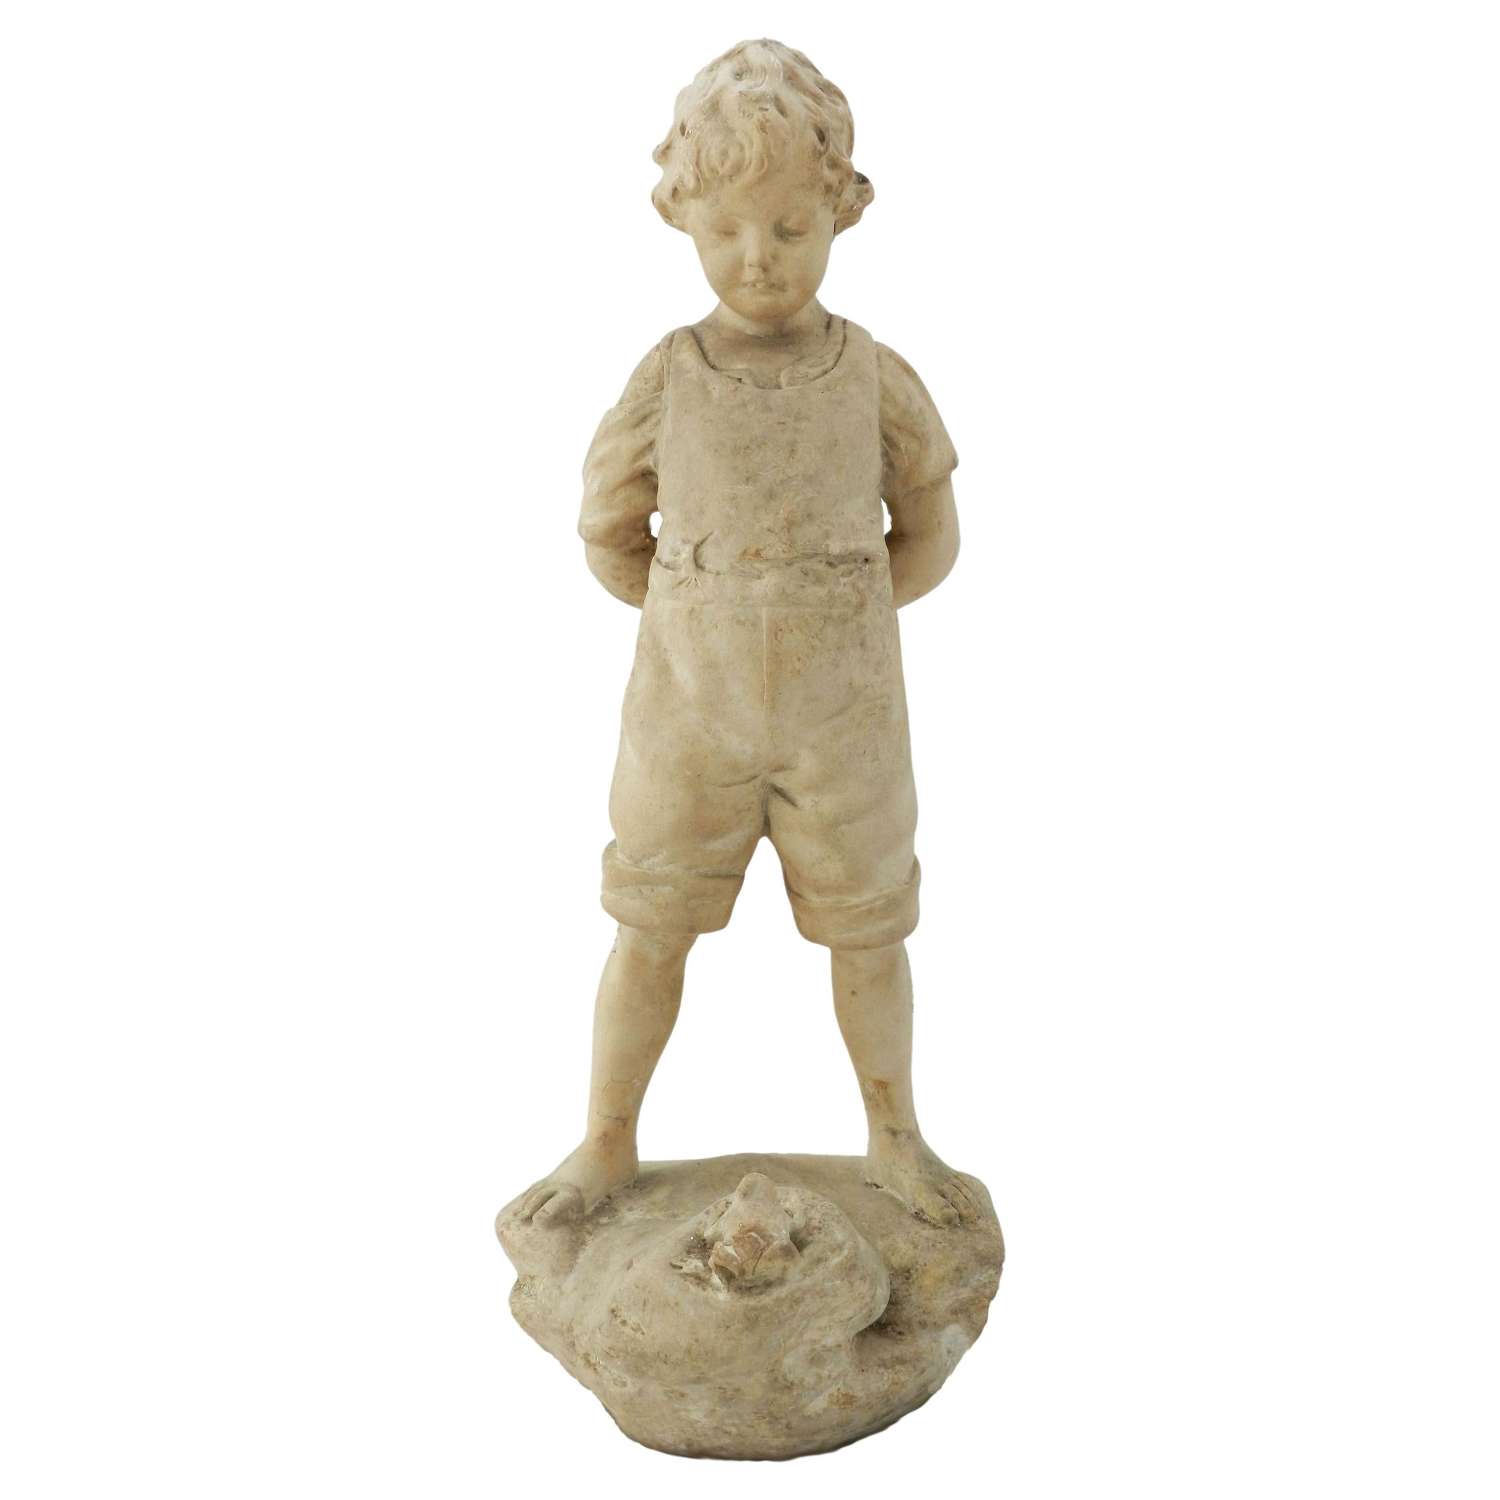 Boy with Frog Chalkware Hard Plaster Statue, c1910-20 FREE SHIPPING